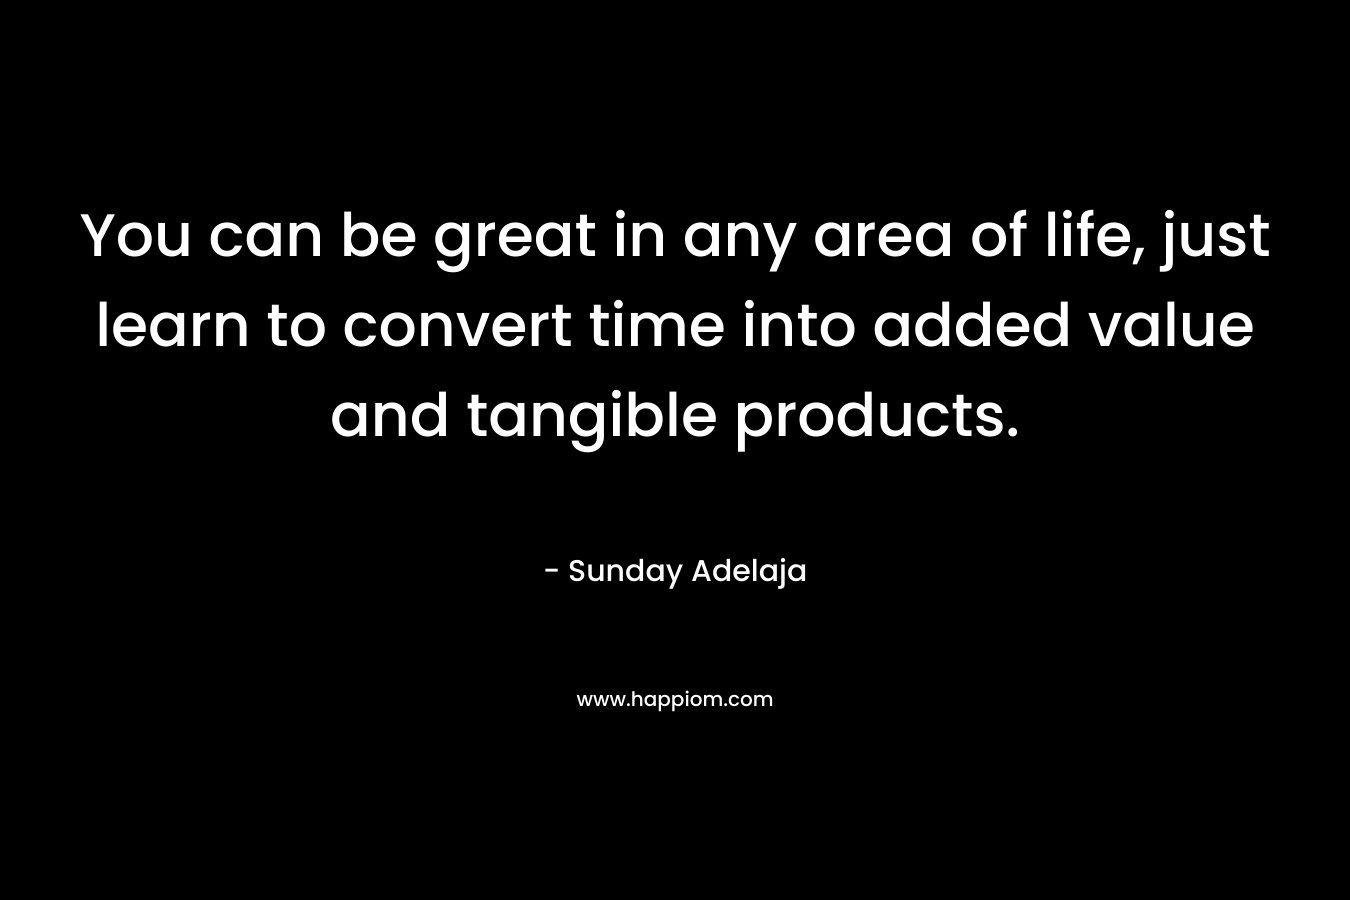 You can be great in any area of life, just learn to convert time into added value and tangible products.